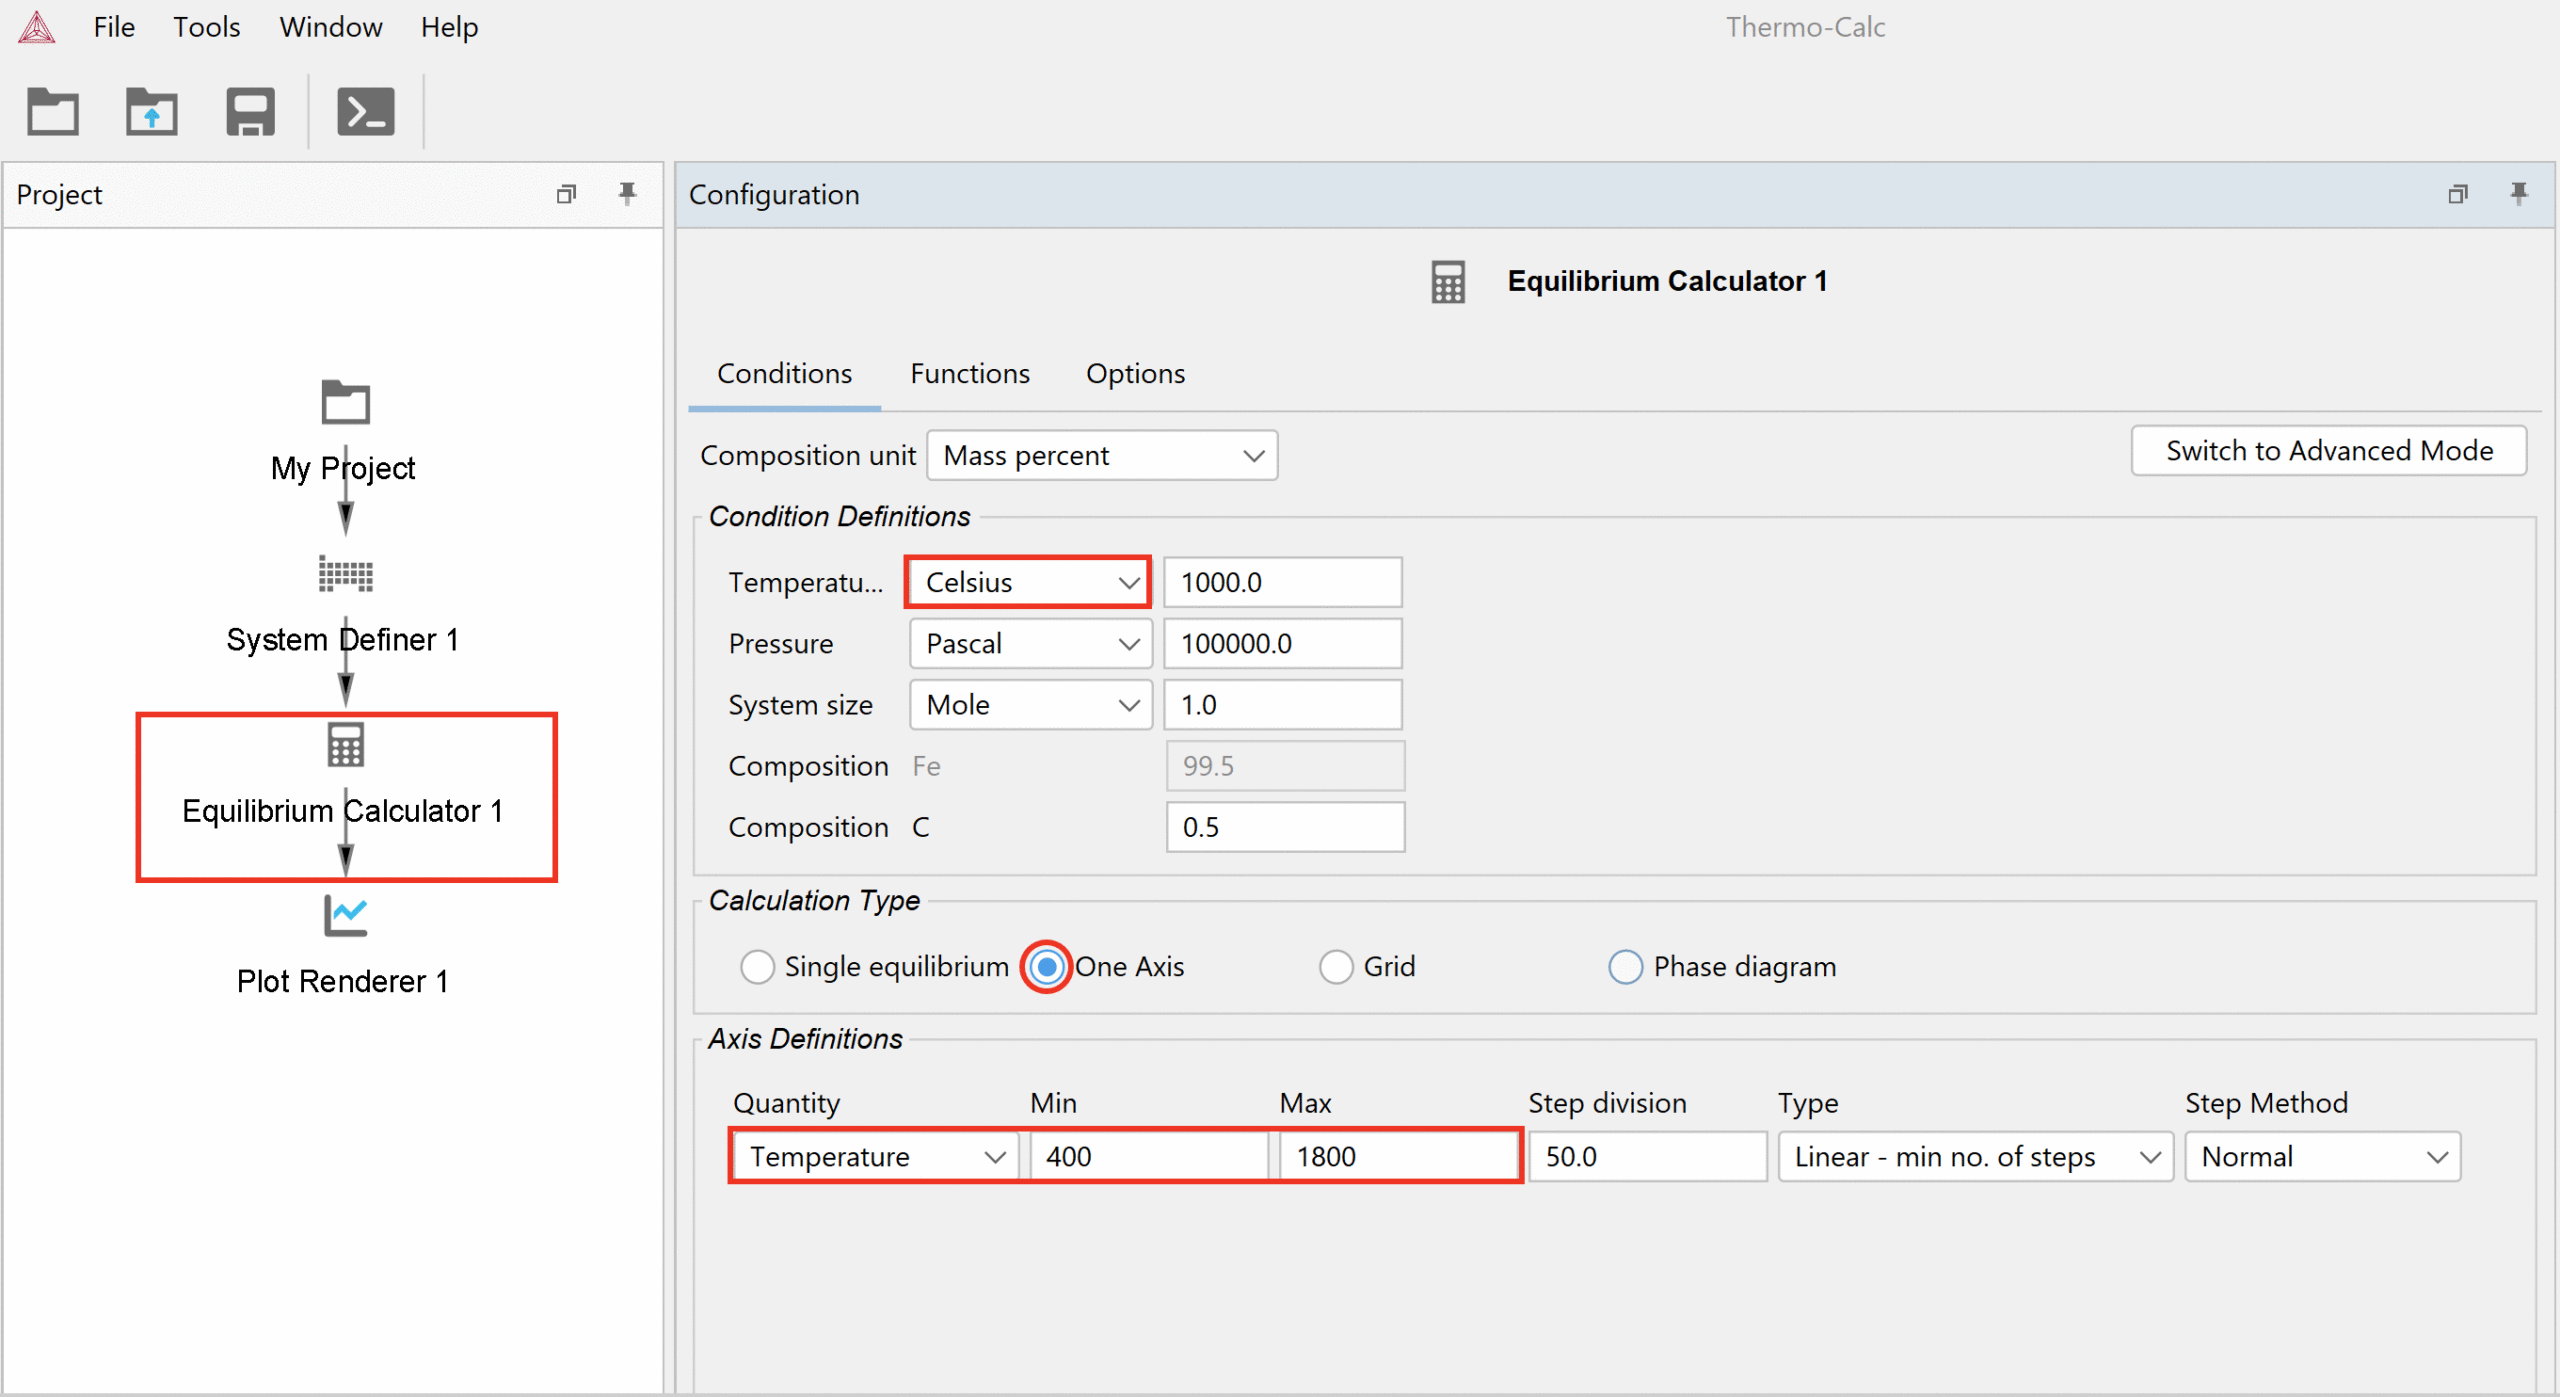 Screenshot showing how to configure the Equilibrium Calculator in Thermo-Calc.